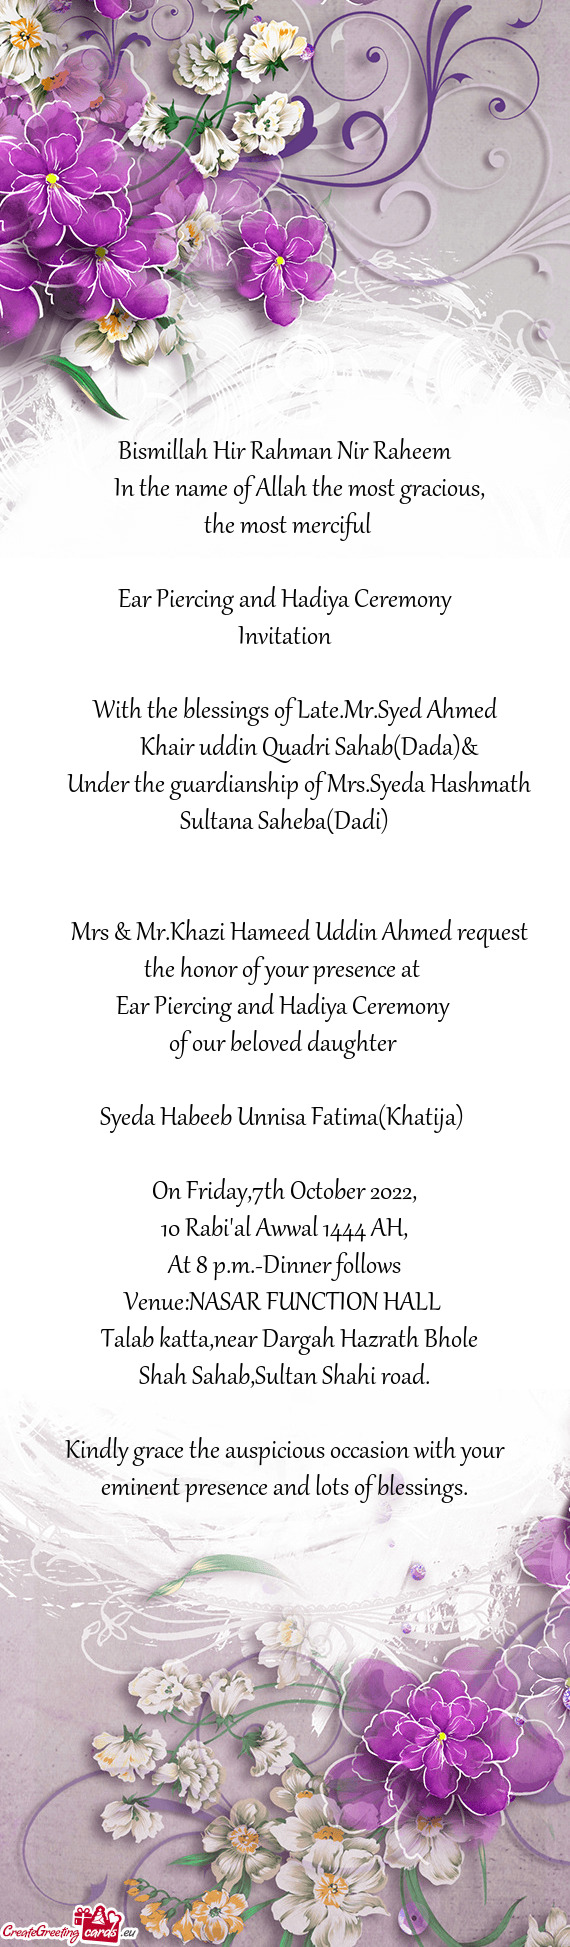 Mrs & Mr.Khazi Hameed Uddin Ahmed request the honor of your presence at